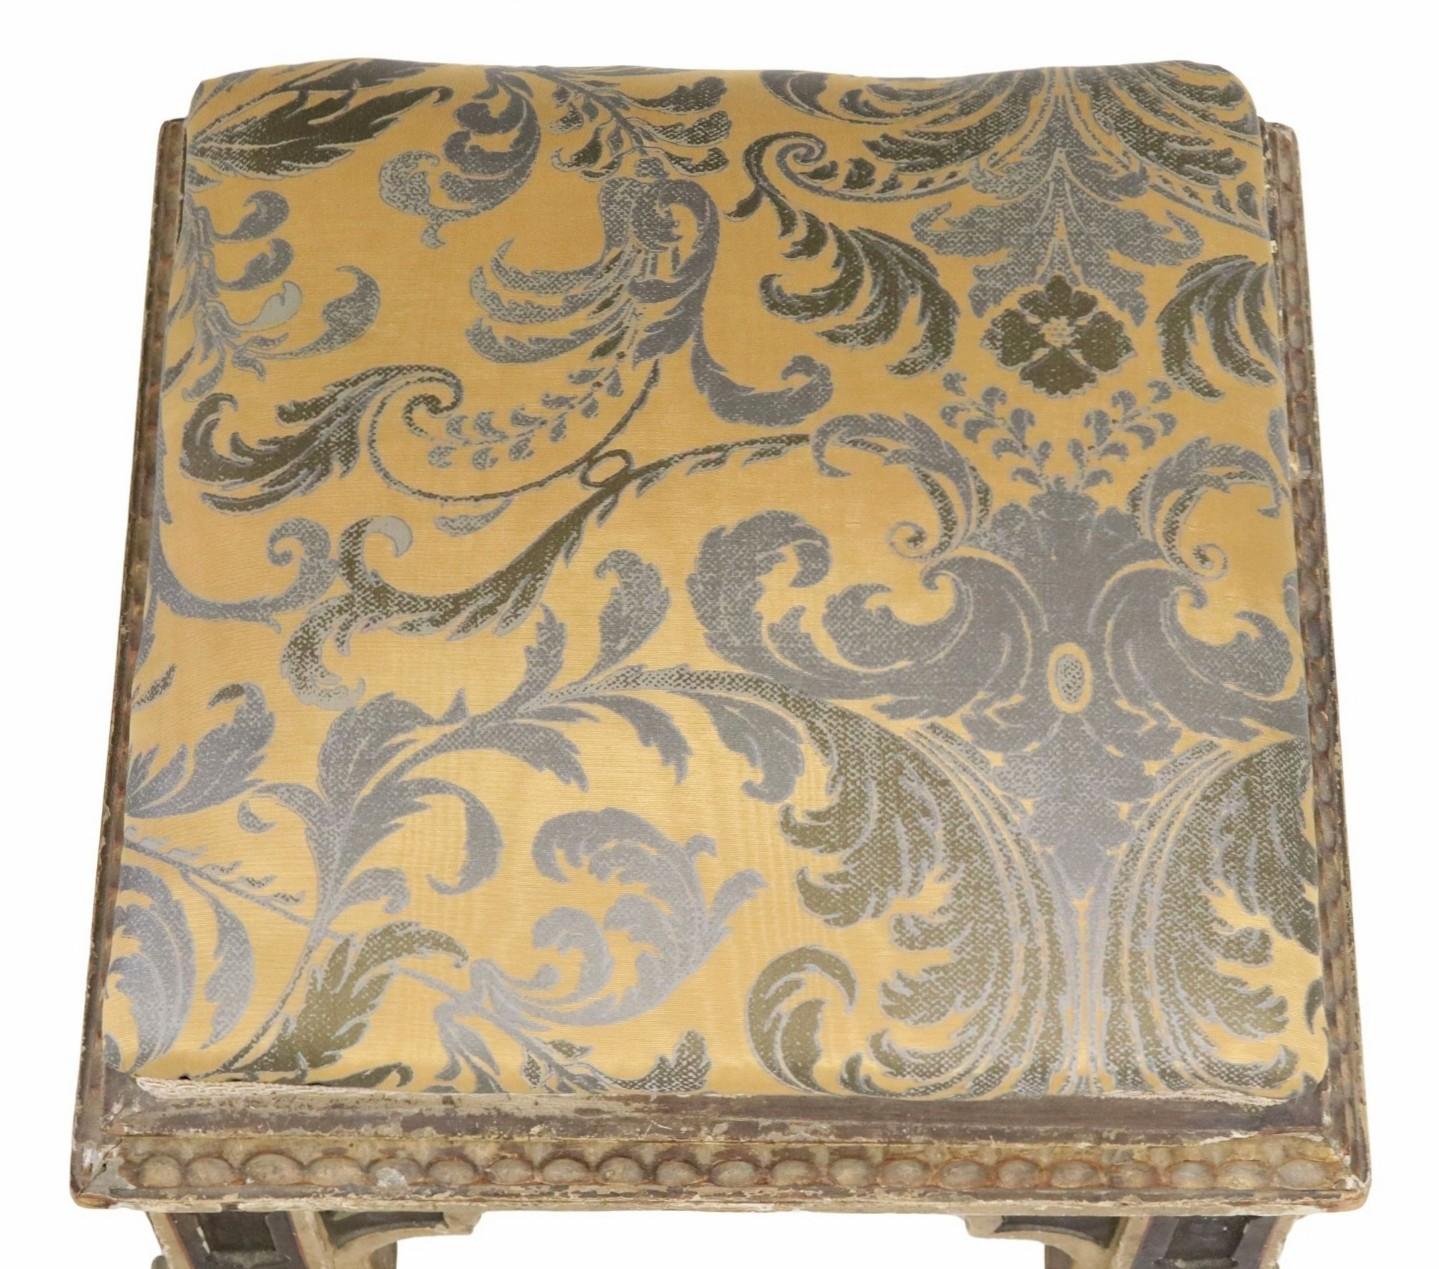 Antique Gothic Revival Carved Polychrome Painted & Upholstered Stool Ottoman In Good Condition For Sale In Forney, TX